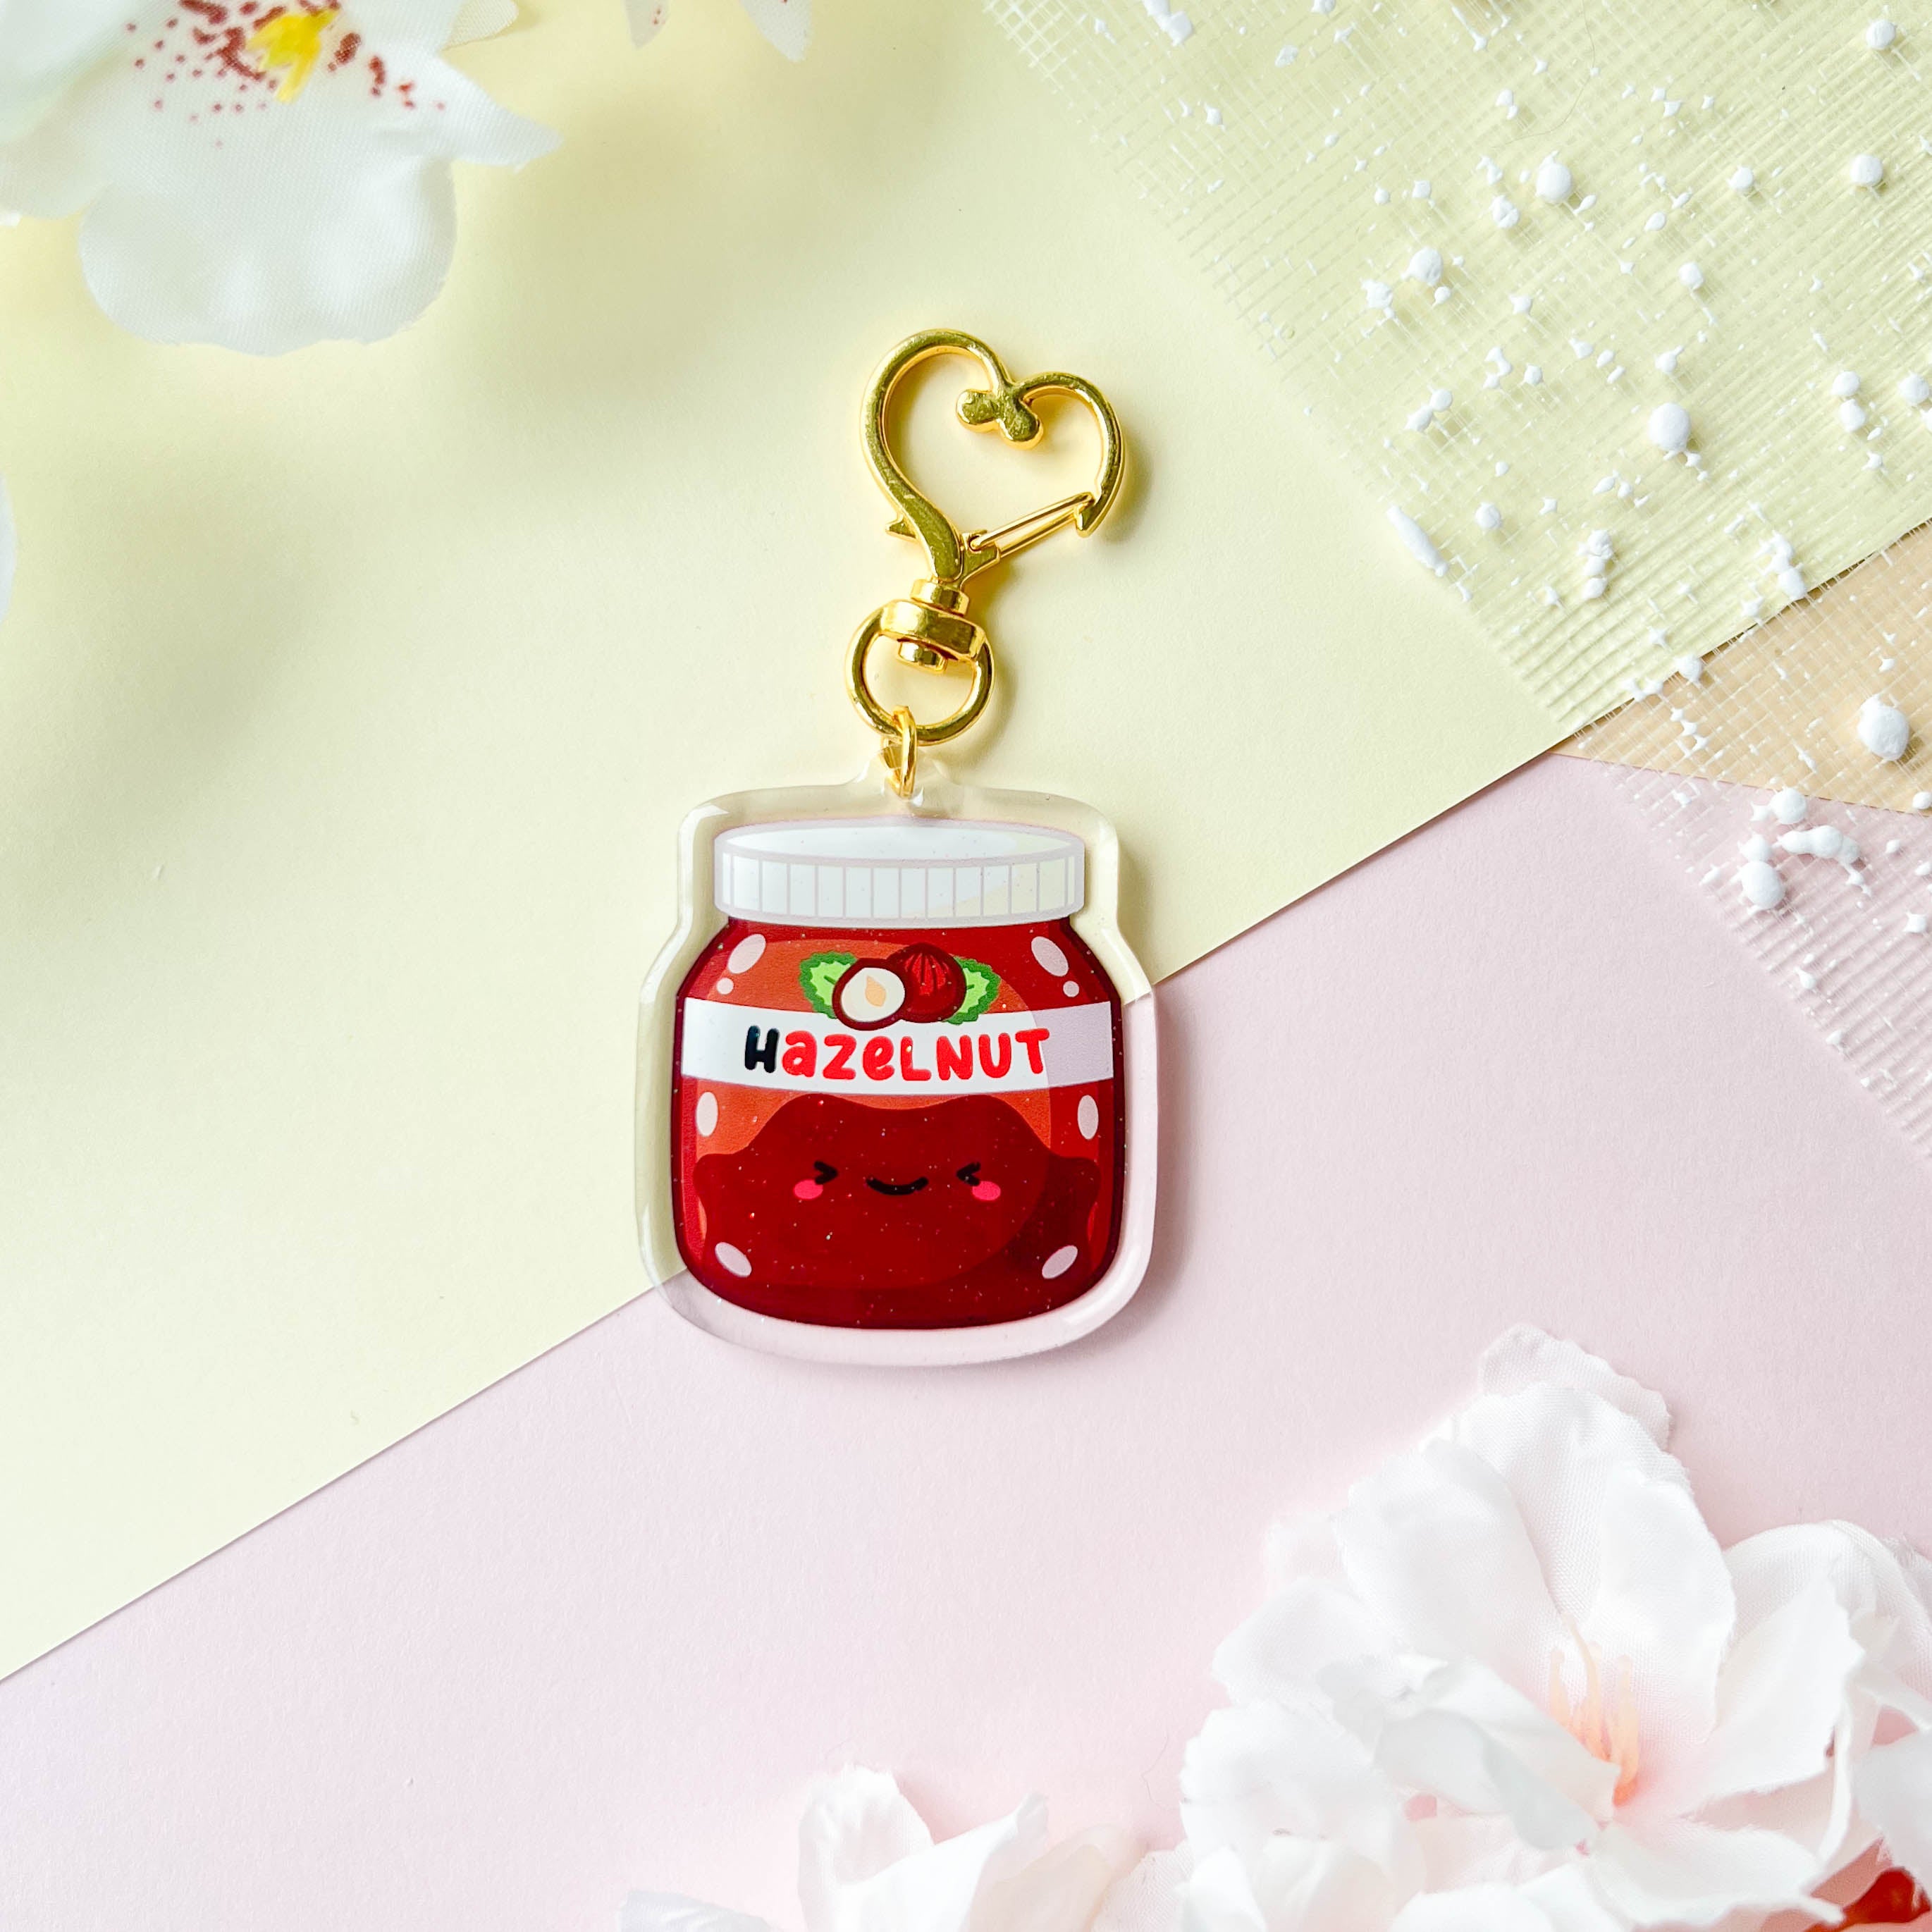 Ditto Condiments Keychain